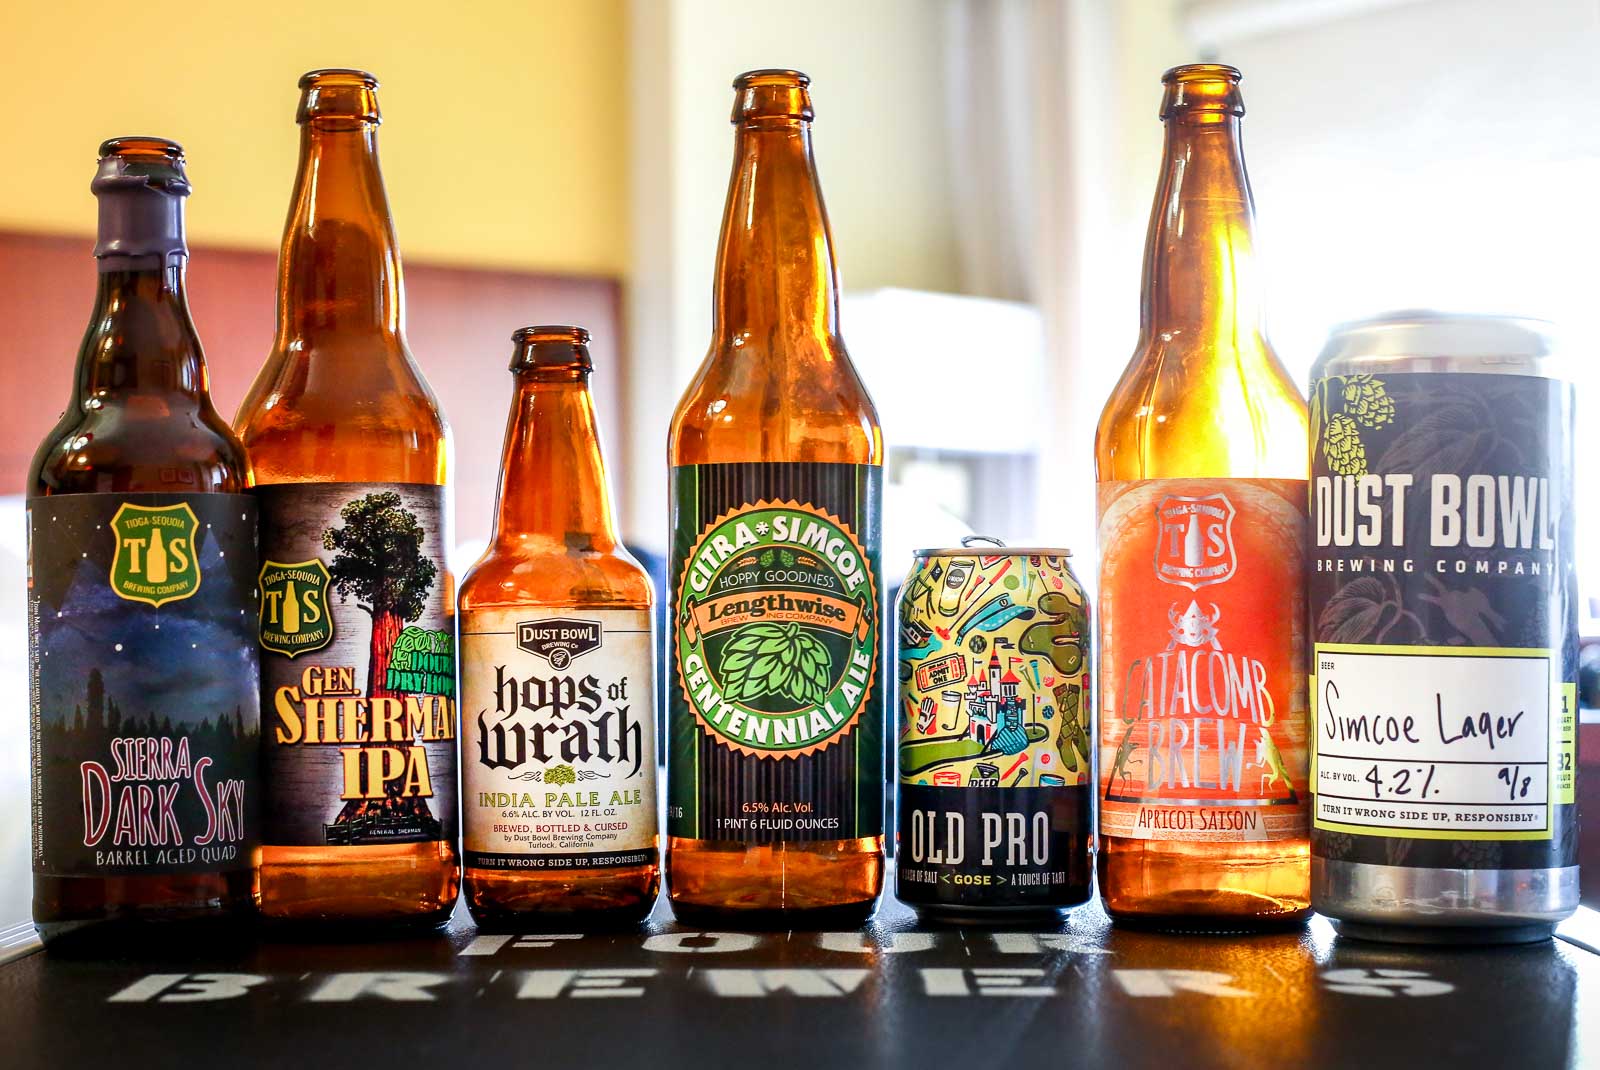 Beers from California